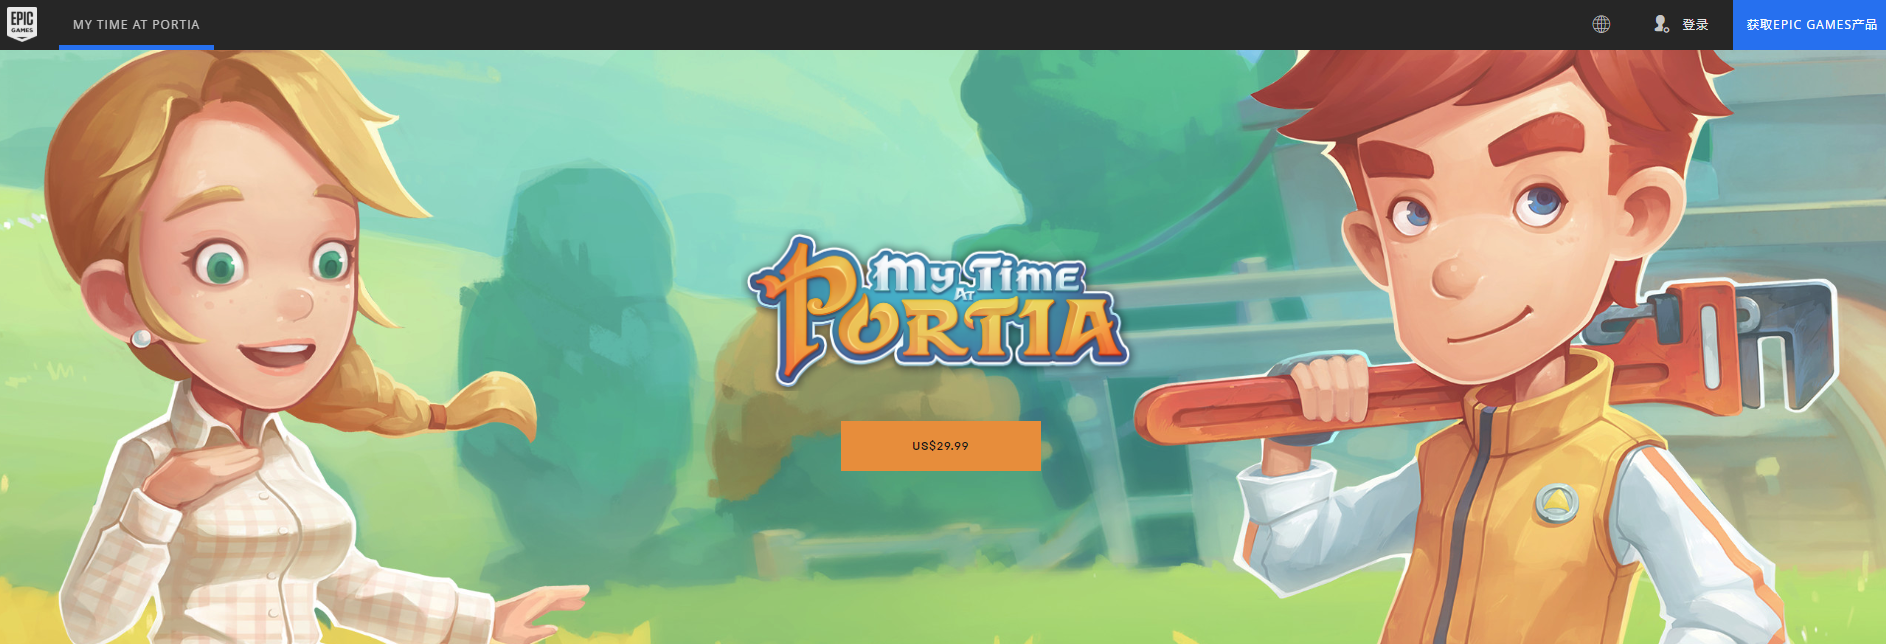 Mine time. My time Portia 2. My time at Portia Мэй. My time at Portia Линда. My time at Portia Кэрол.